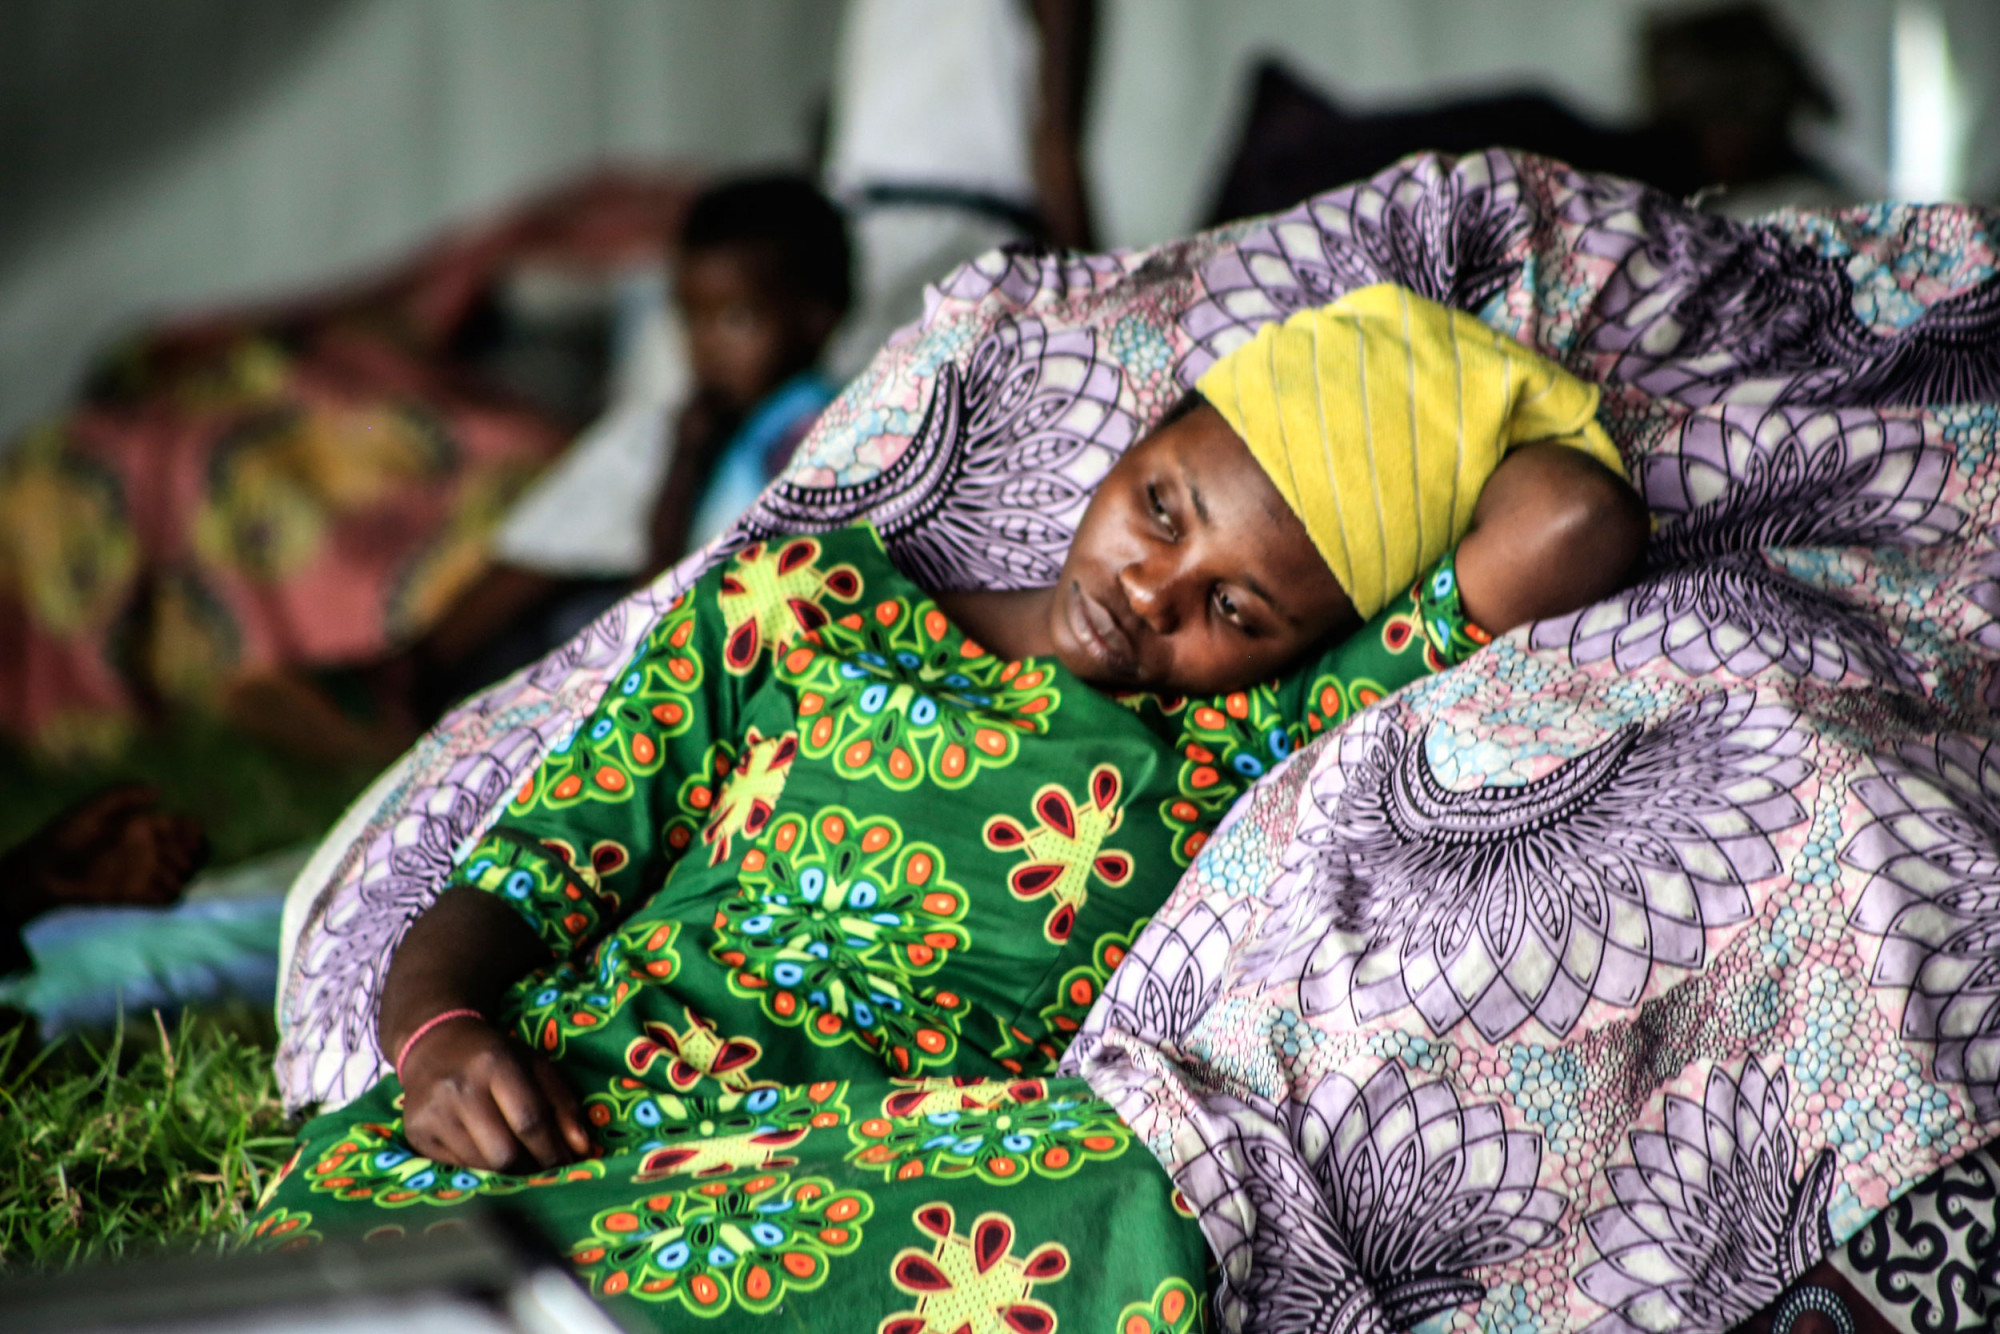 Rugero, Rwanda, May 2021. Bahati, who fled across the border into Rwanda, rests at a centre for people displaced by the eruption, in Rugero, Rwanda. © Ley Uwera for Fondation Carmignac 